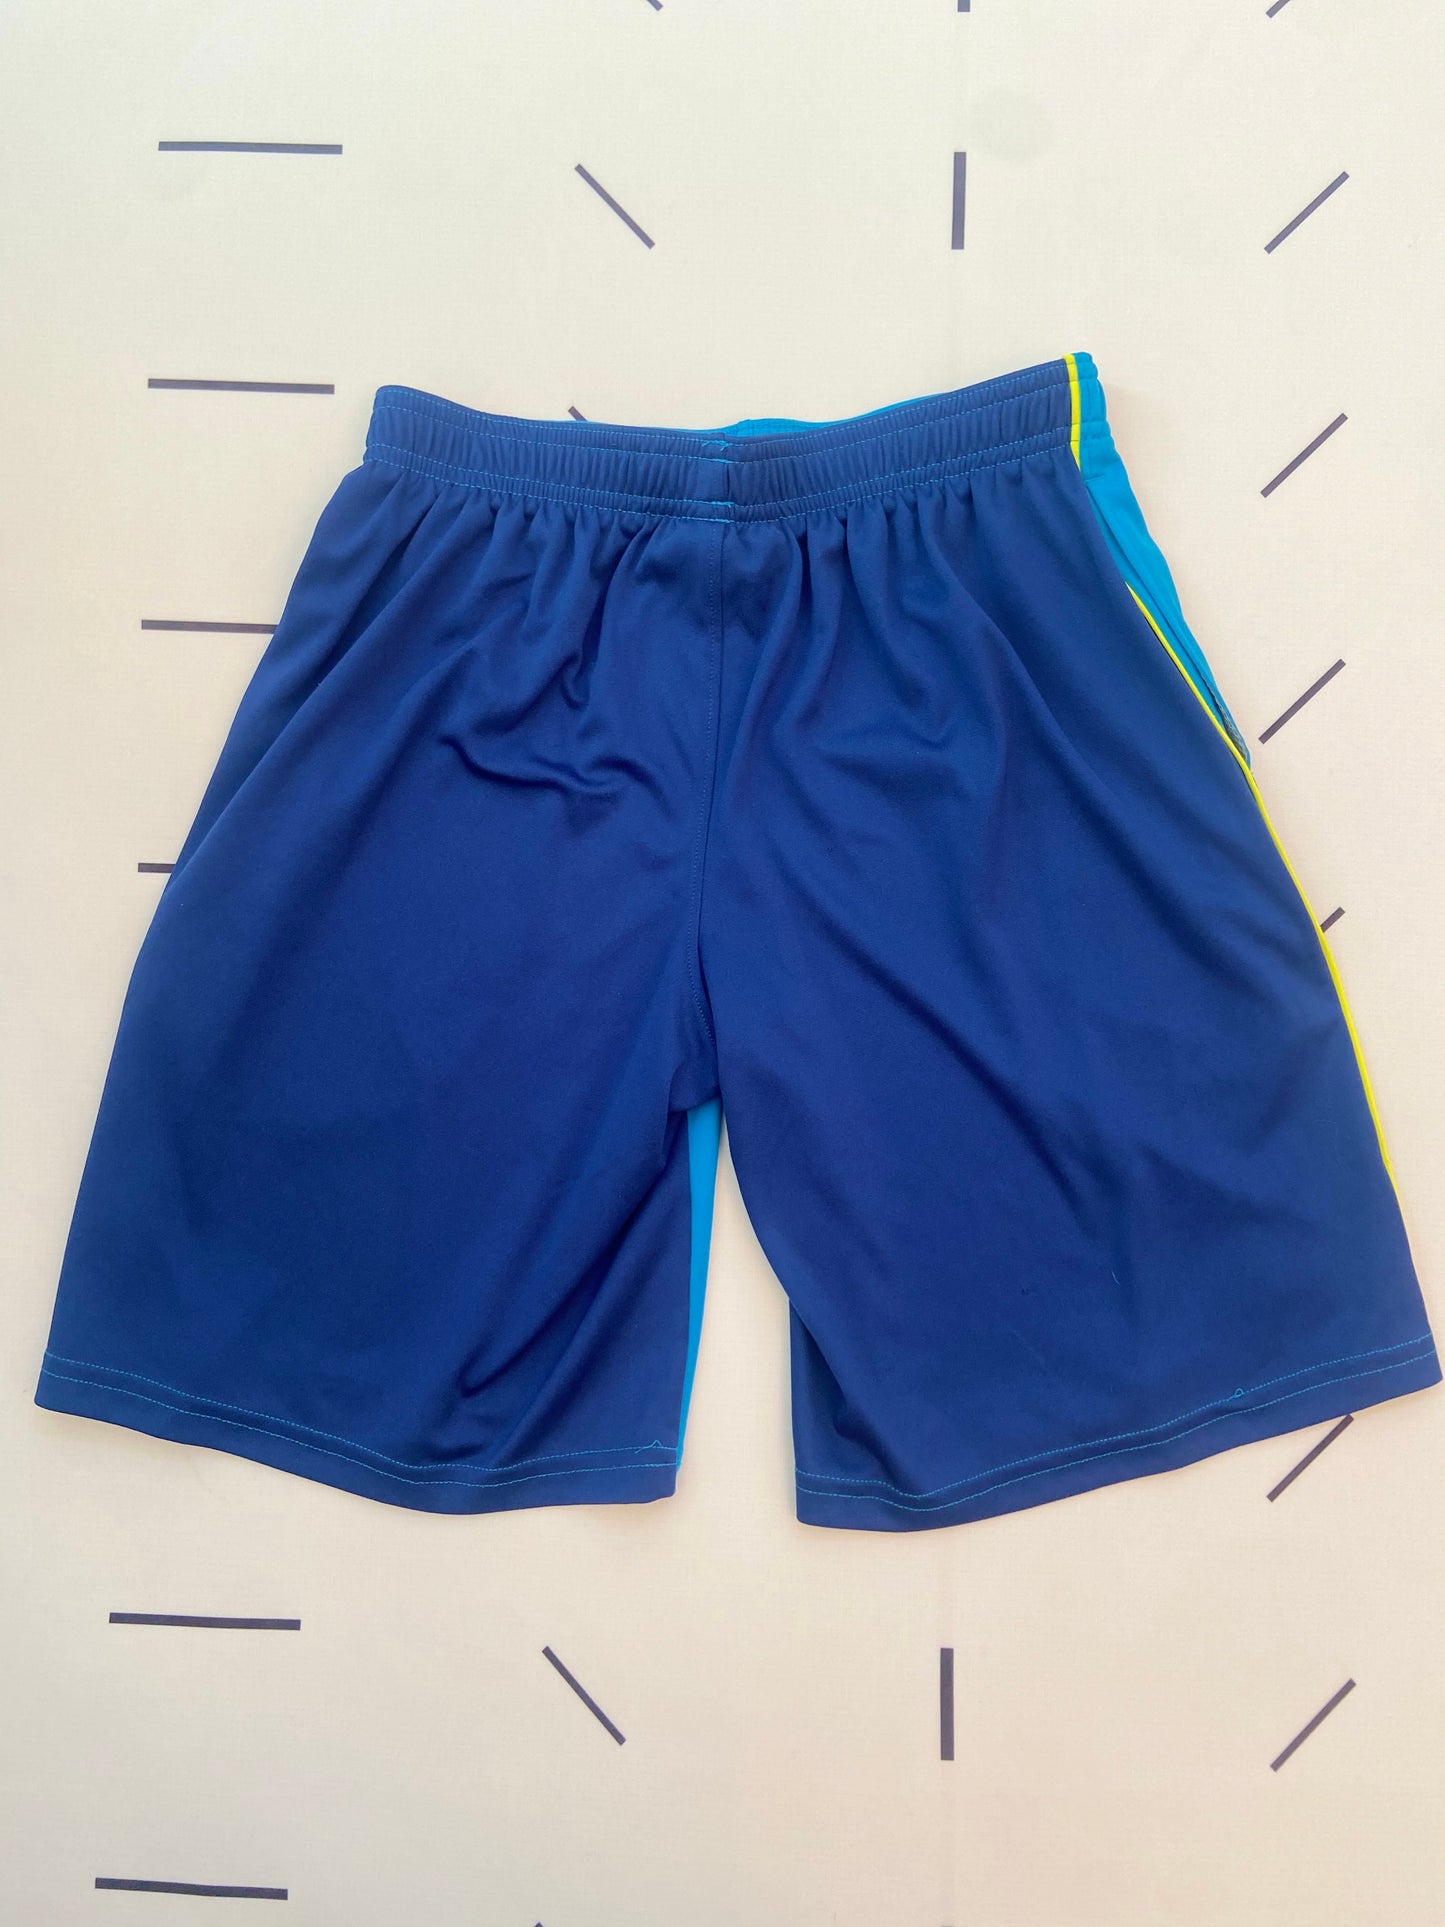 Under Armour Gym Shorts - Youth M